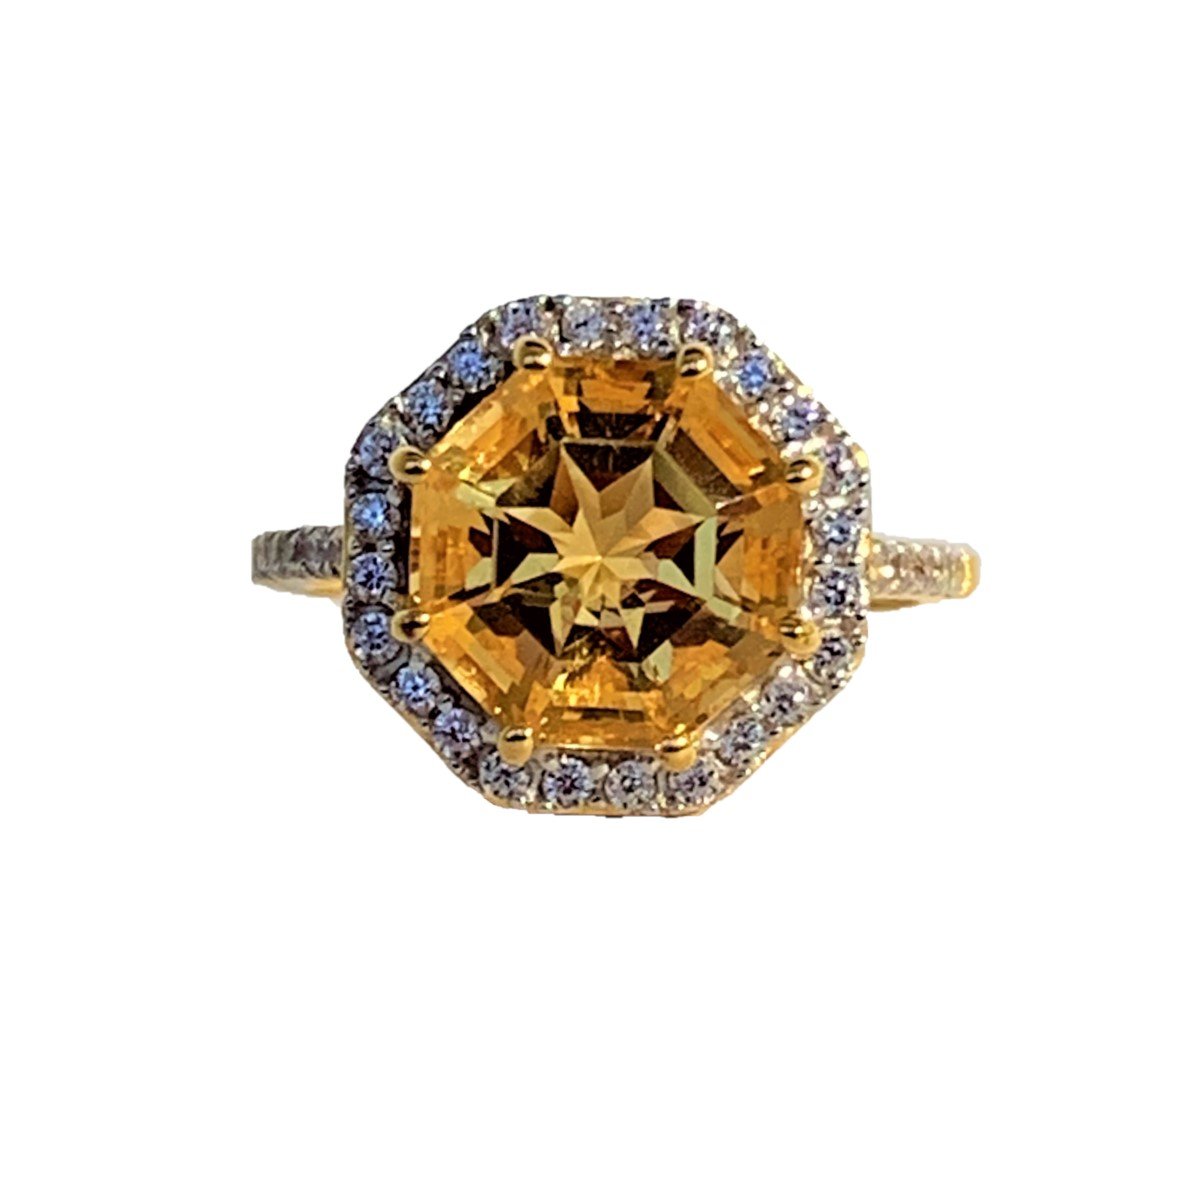 Statement Ring Citrine 18K Gold Plated Silver Classic Halo Citrine FARA Cut & White Zircon Ring, 18K Gold Plated Silver